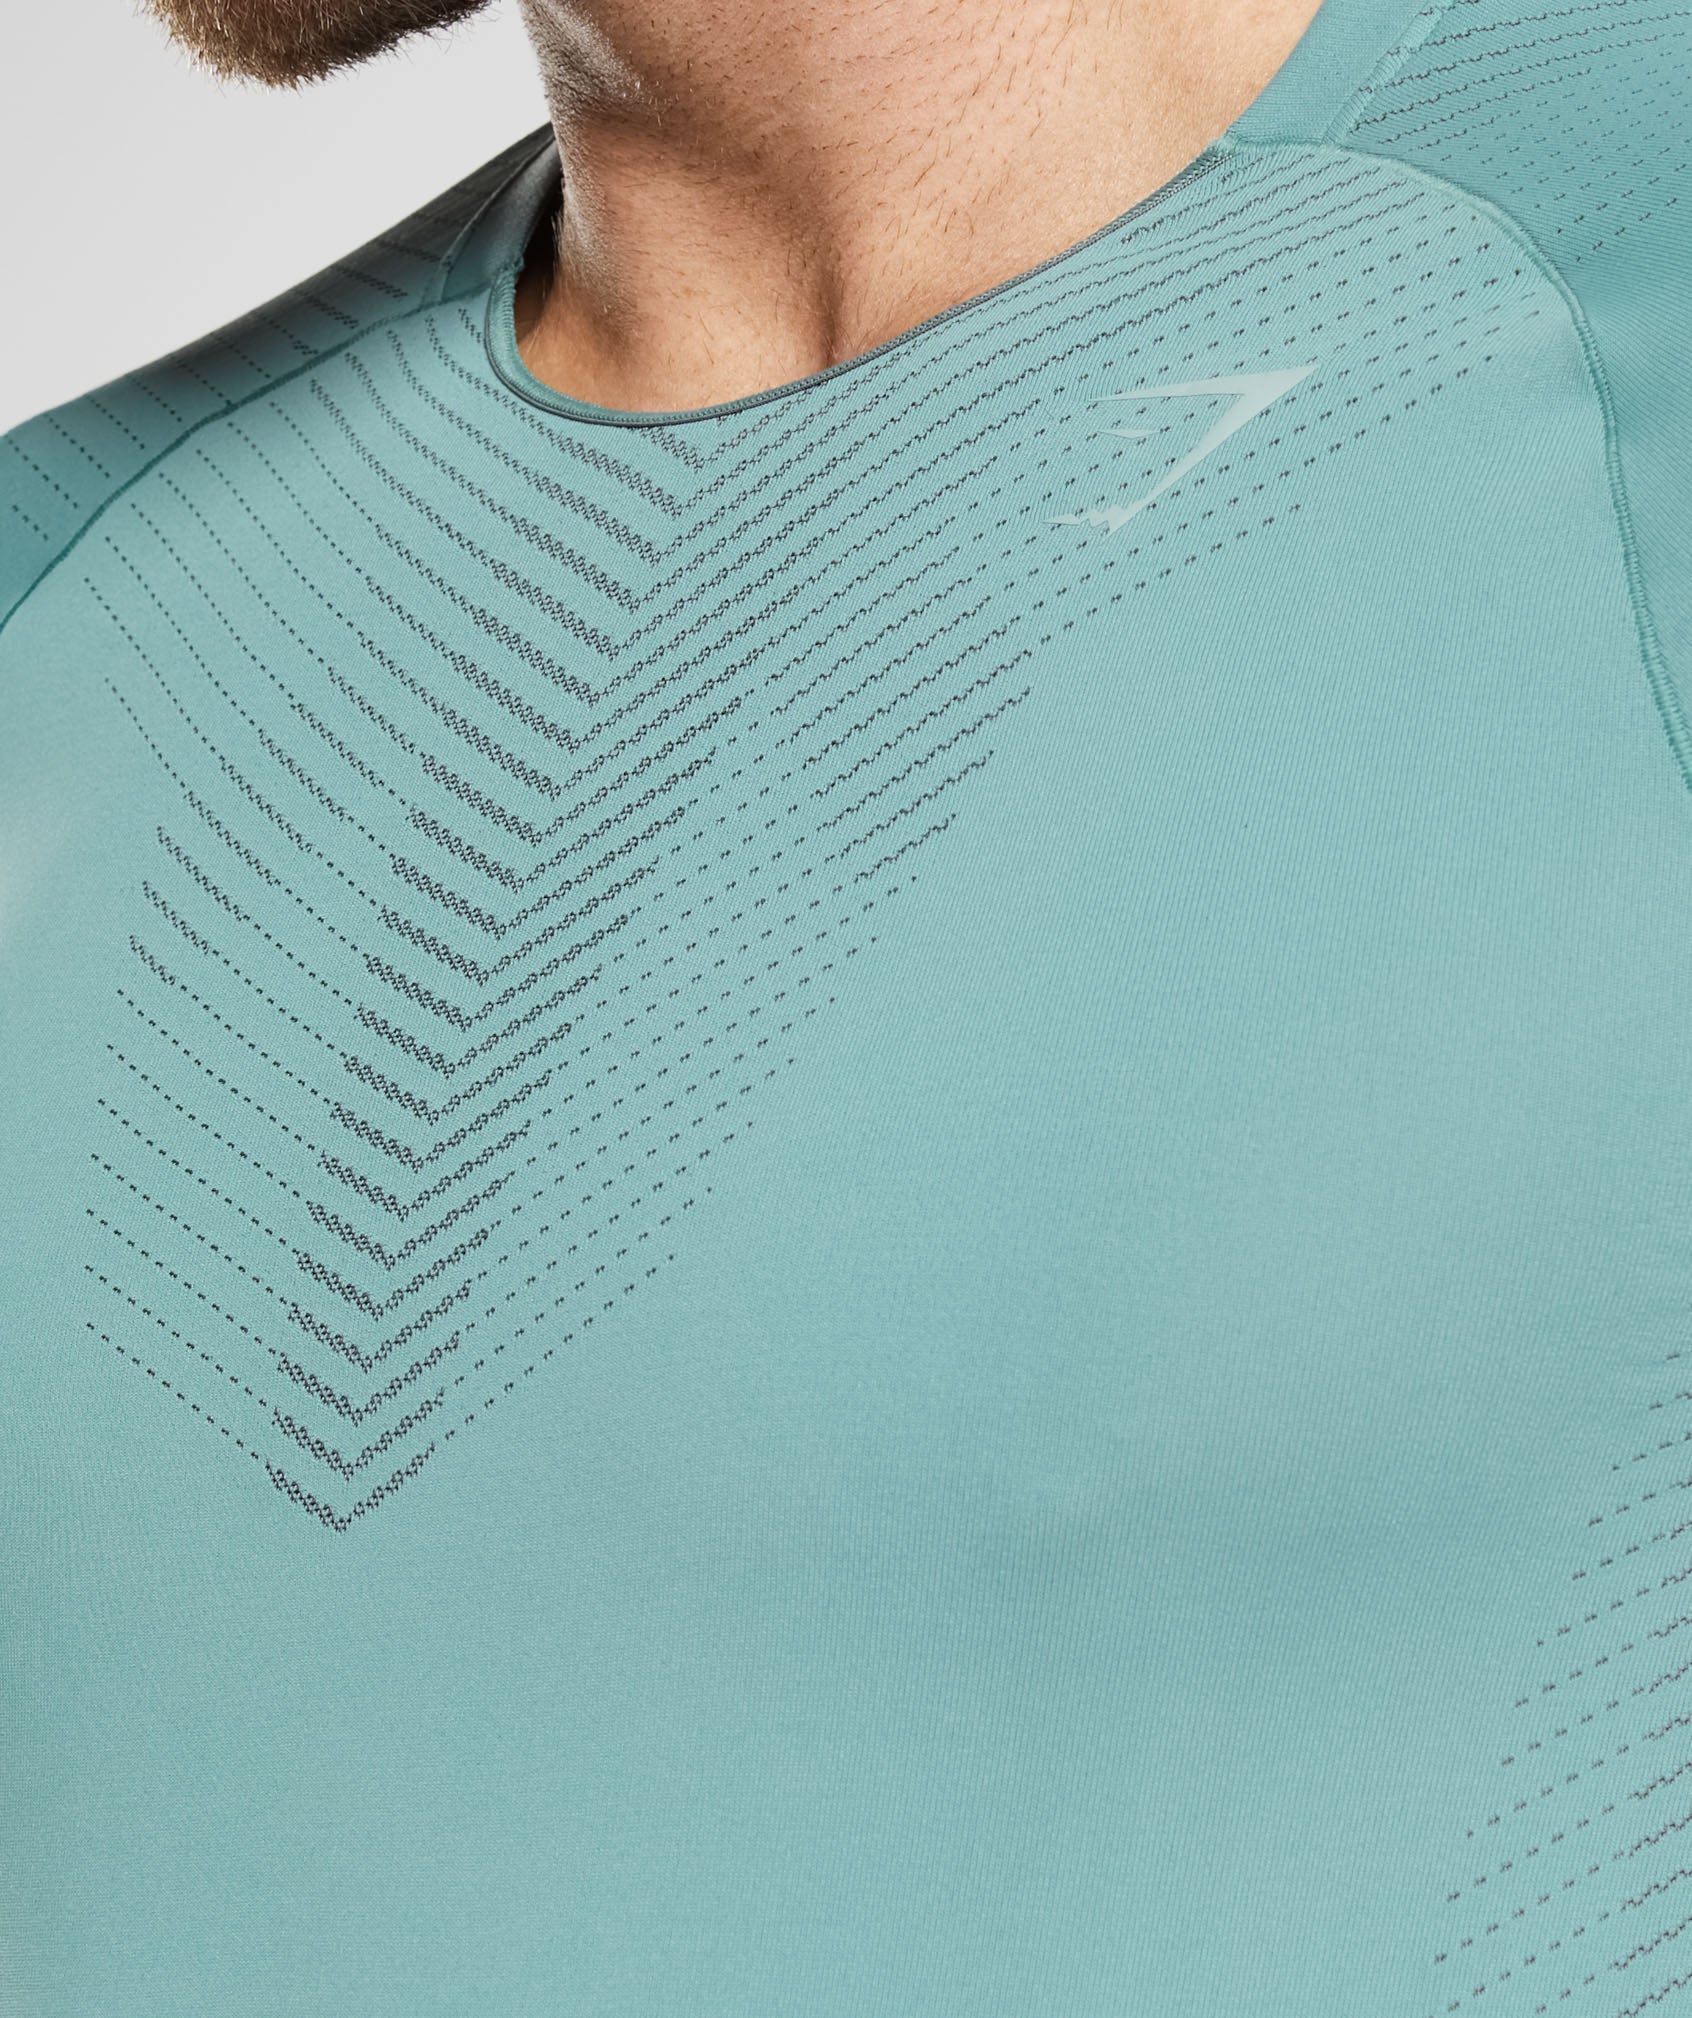 Apex Seamless T-Shirt in Ink Teal/Silhouette Grey - view 5